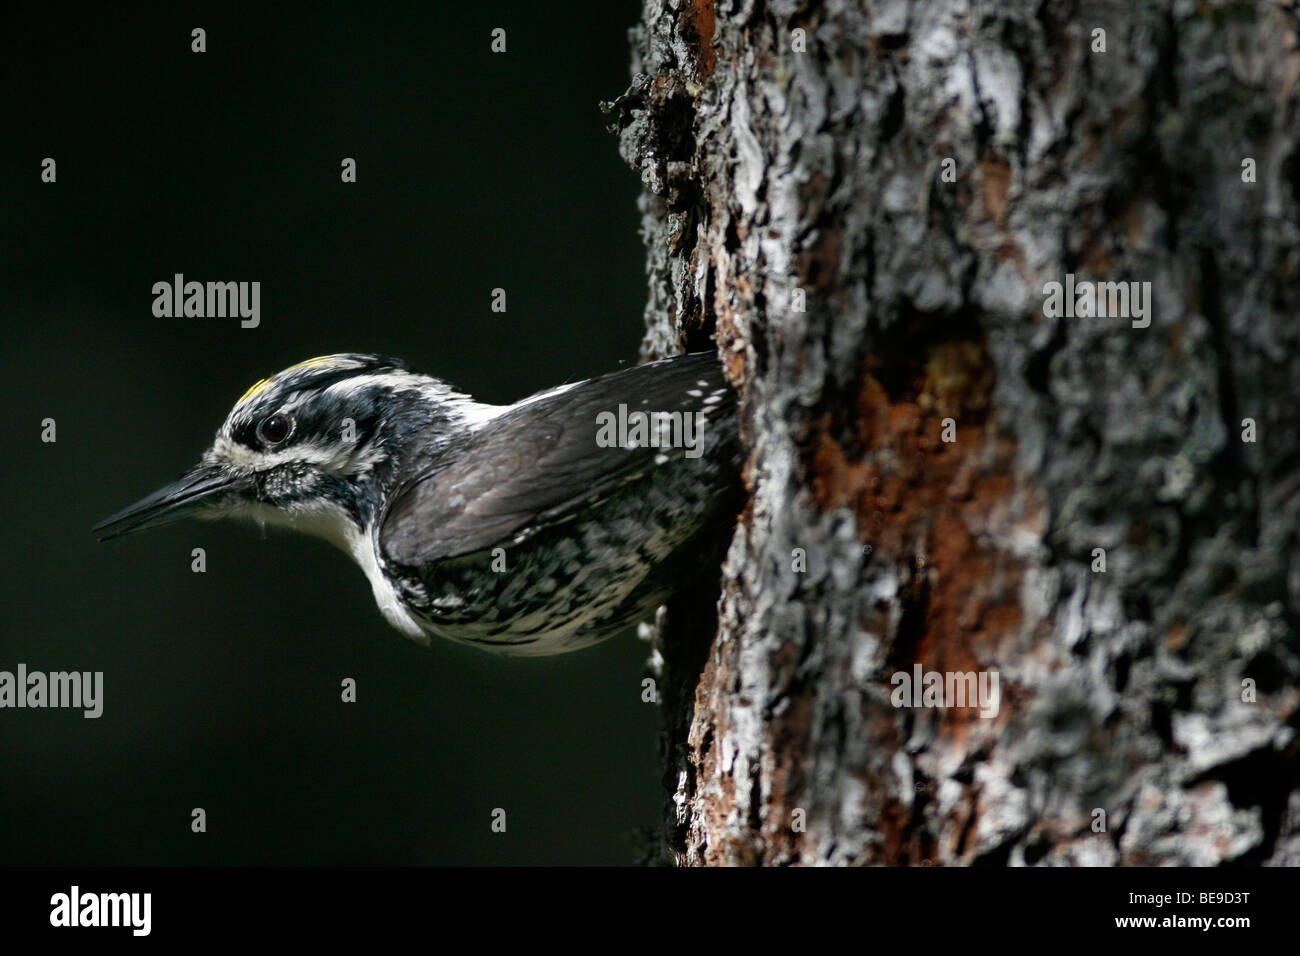 Drieteenspecht uit het gat in boom. Three-toed Woodpecker going out the hole in the tree. Stock Photo